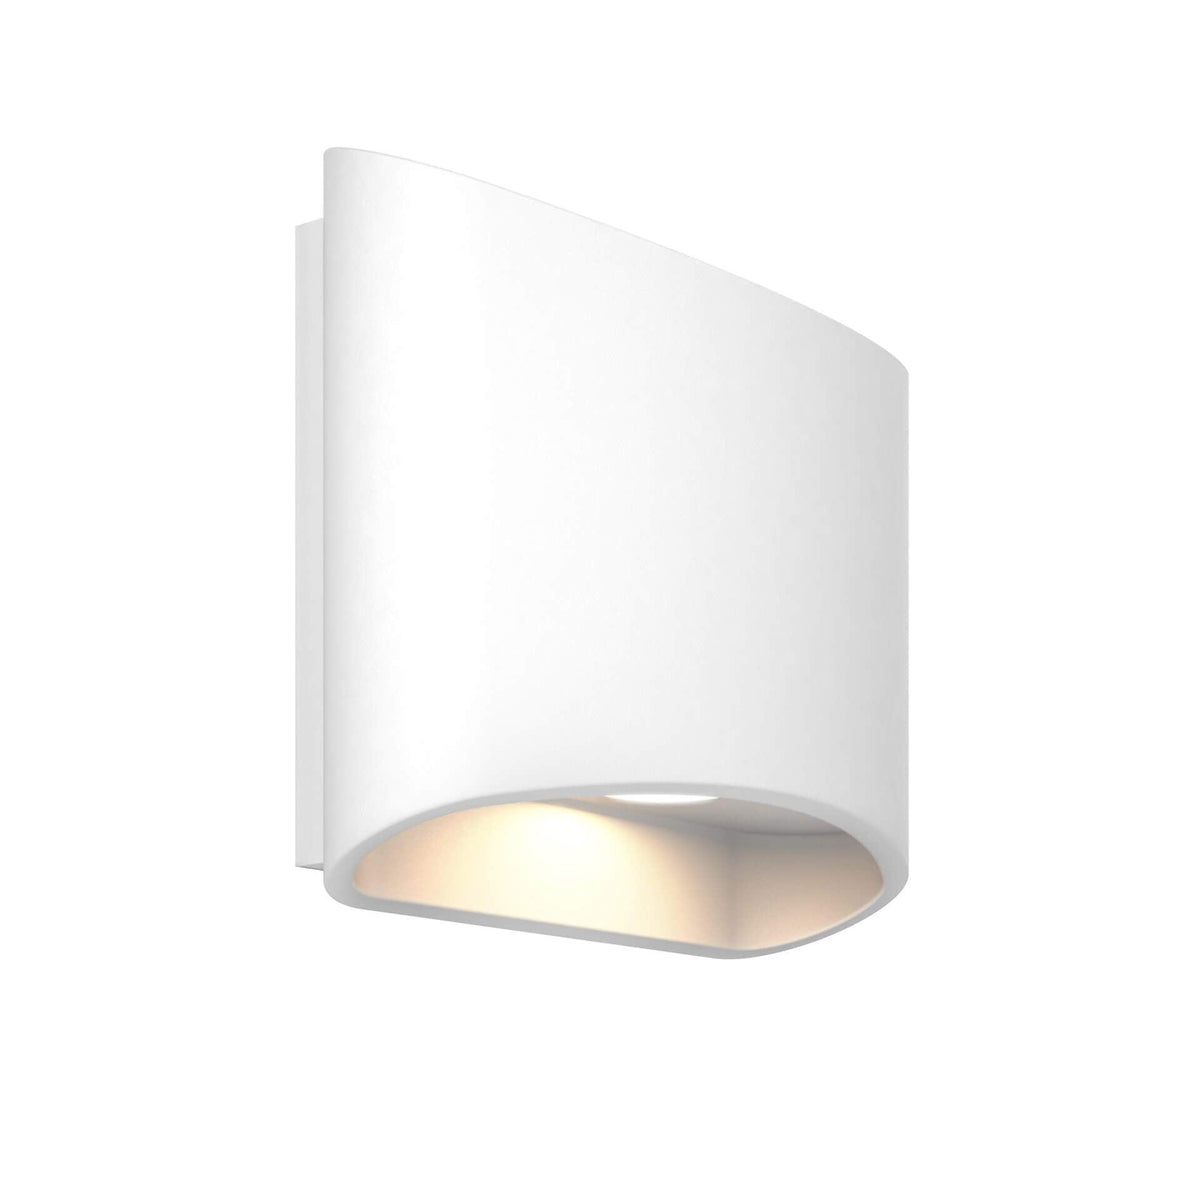 Dals Lighting - LEDWALL-H Oval Up/Down LED Wall Light - LEDWALL-H-WH | Montreal Lighting & Hardware